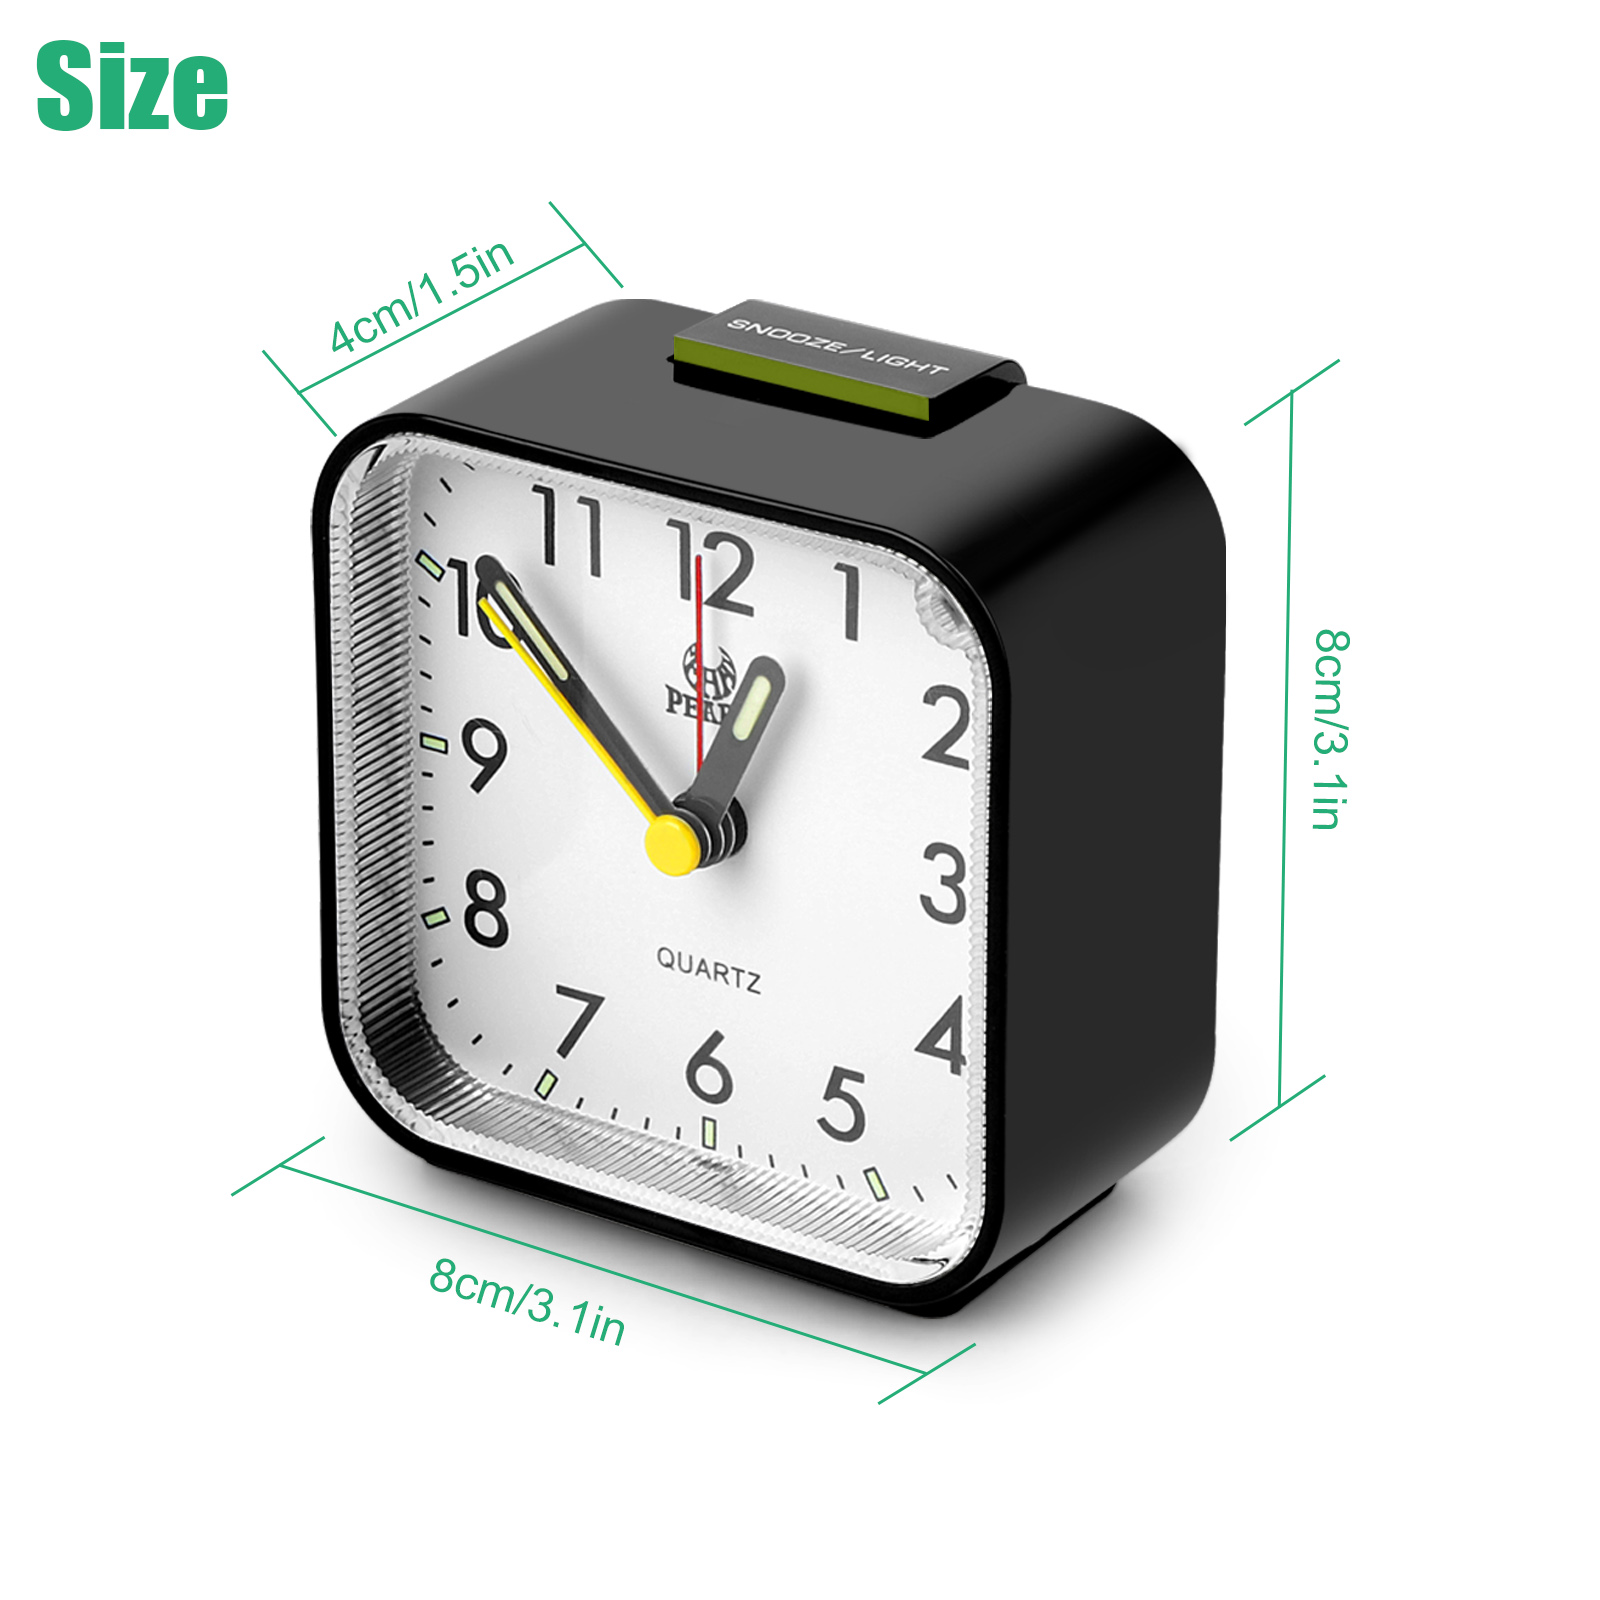 TSV Old-Fashioned Alarm Clock, Mini Battery Operated Analog Alarm Clock Square Travel Portable Alarm Clock, Compact & Lightweight Bedside Clock with Snooze Timed for Teenager, Elderly, Travelers - image 3 of 9